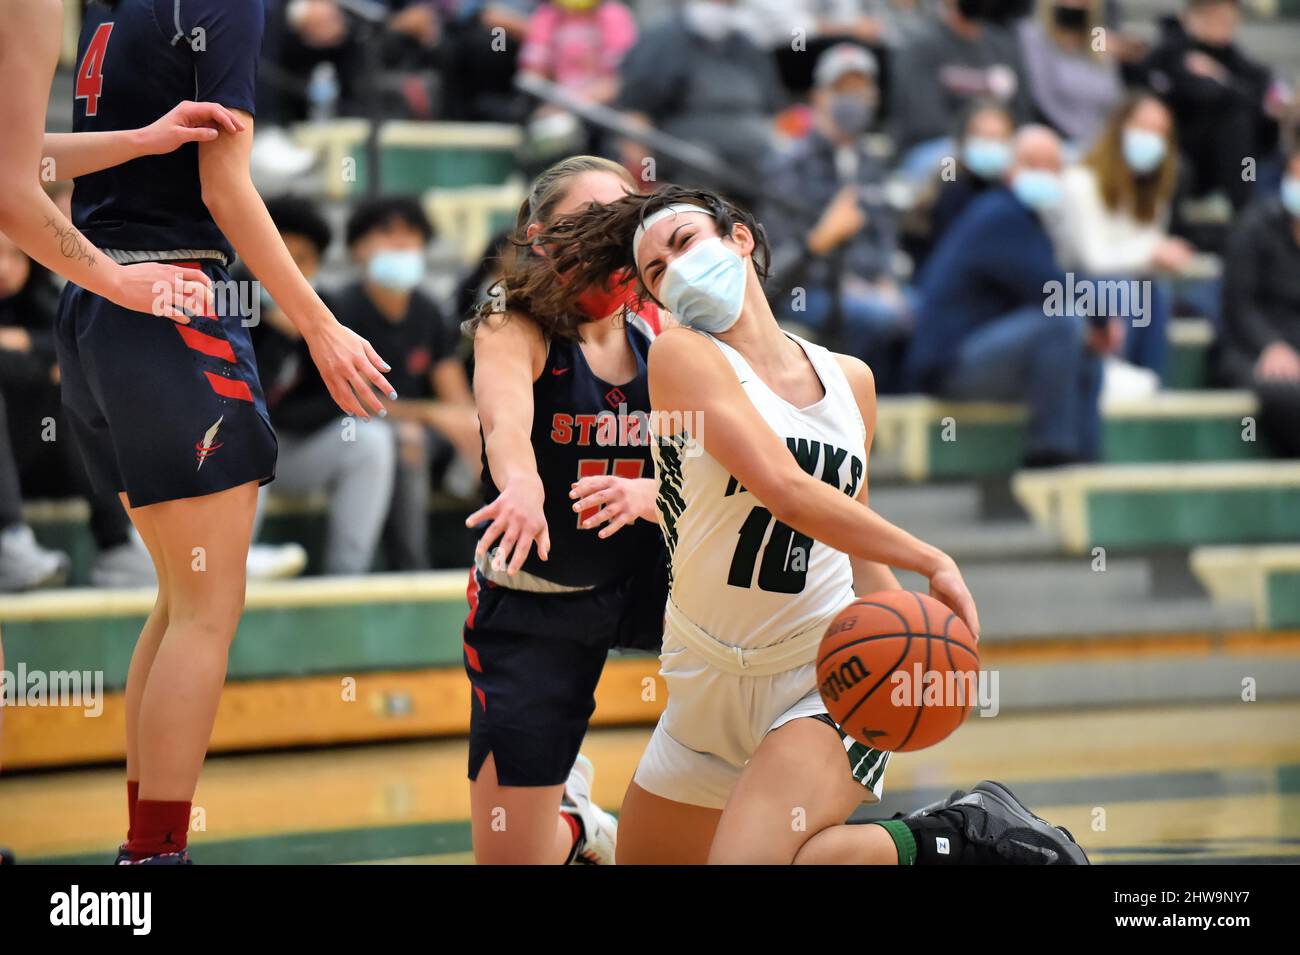 USA. Player trying to control the ball and assume control during a scramble for the basketball that took two players to the floor. Stock Photo